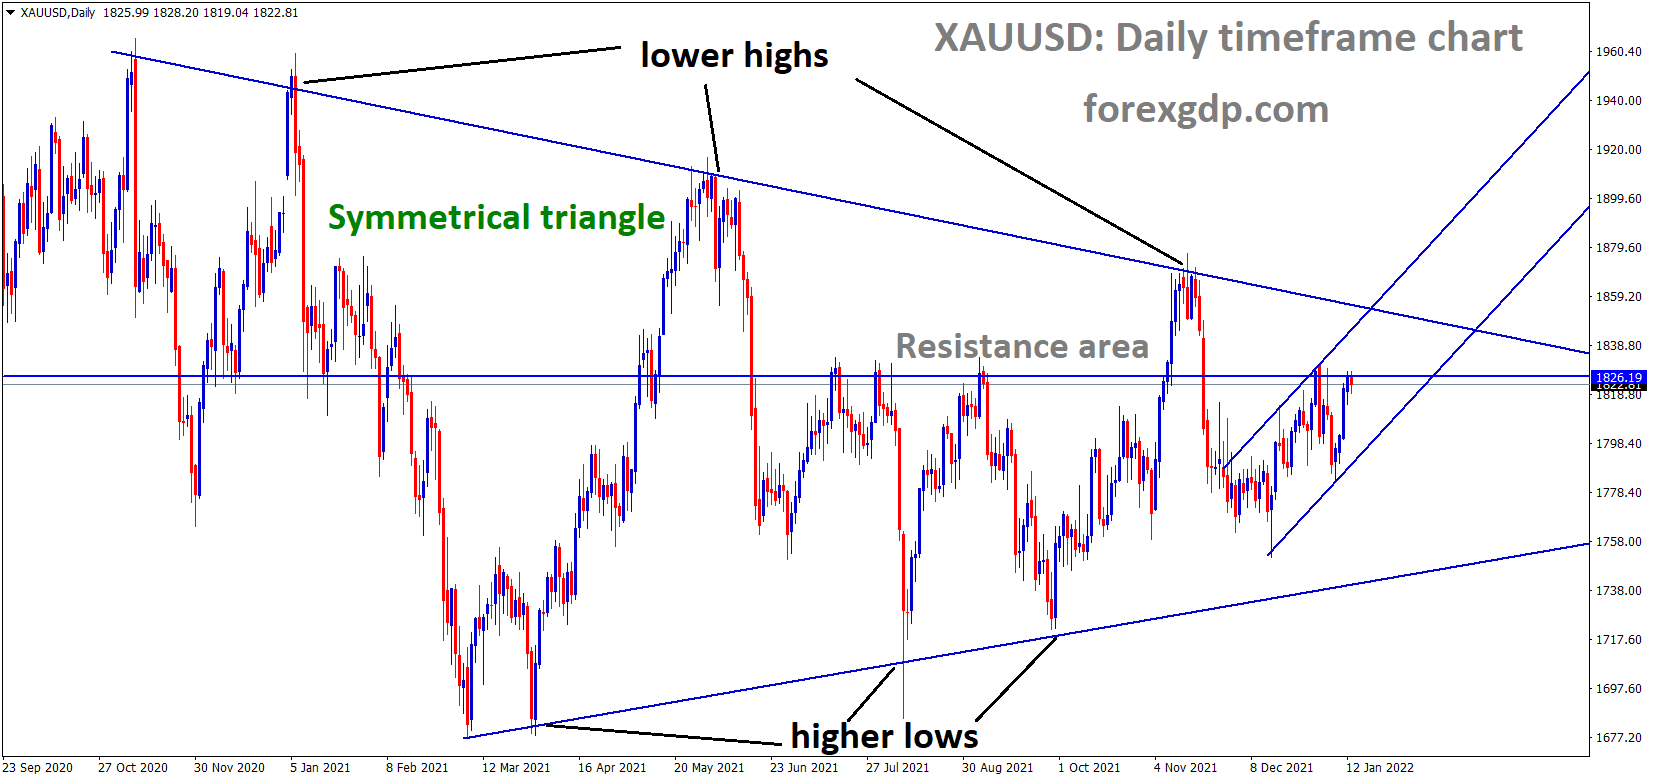 XAUUSD Gold Prices are moving in the Symmetrical triangle pattern and the market has reached the Horizontal resistance area of the pattern.